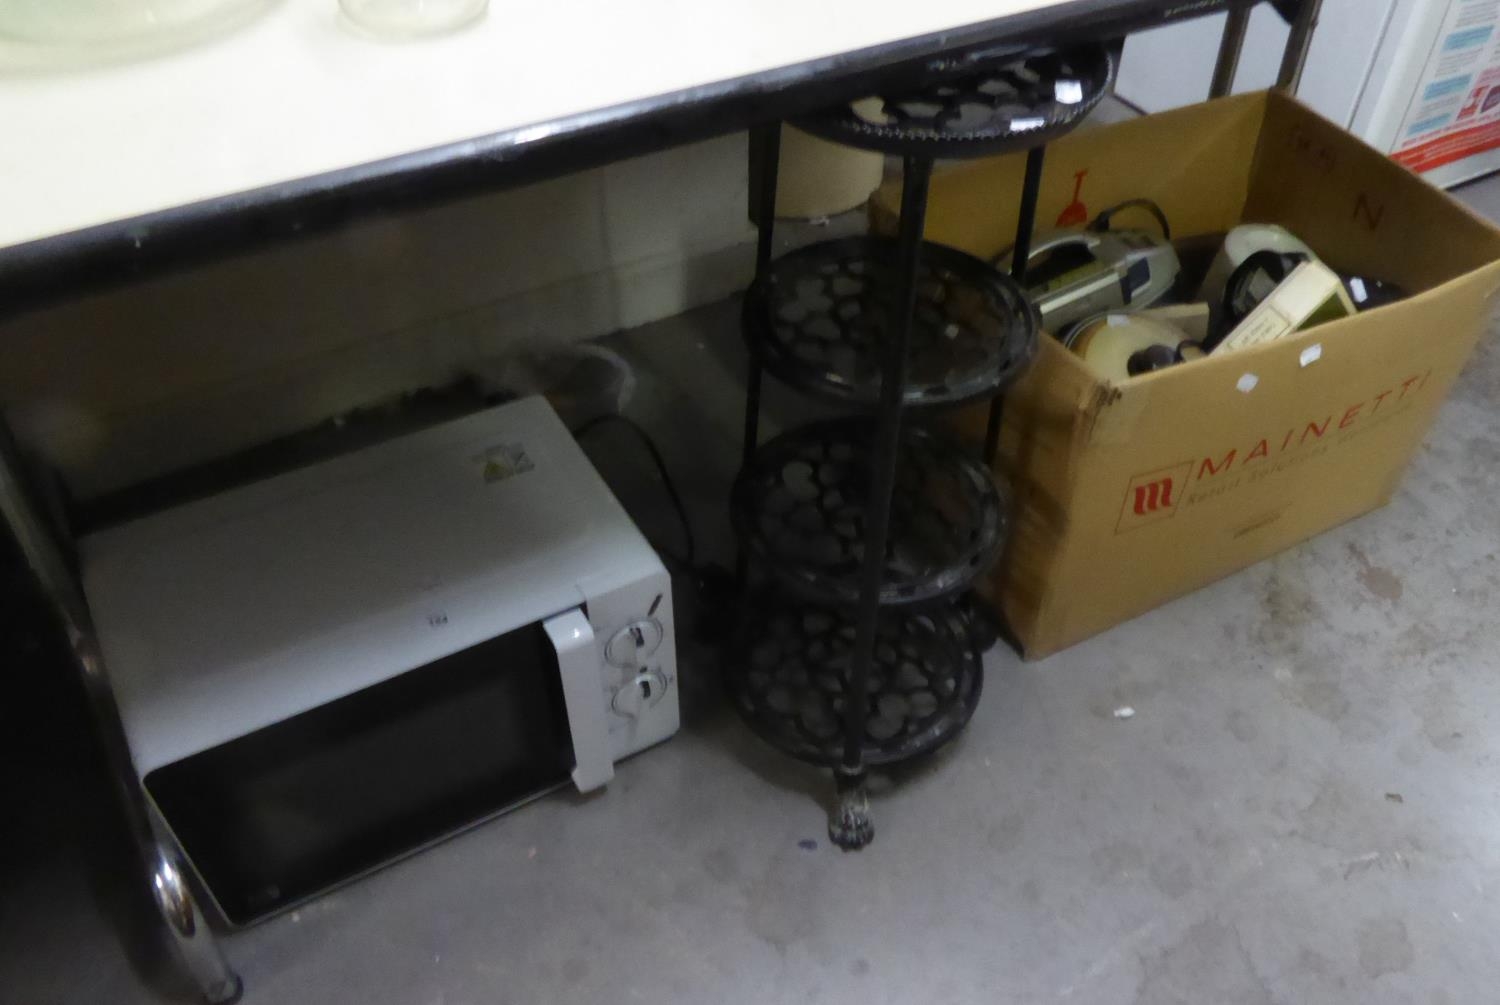 MICROWAVE OVEN, TOASTER, JUG KETTLE, STEAM IRON AND PANS ON BLACK METAL PAN STAND